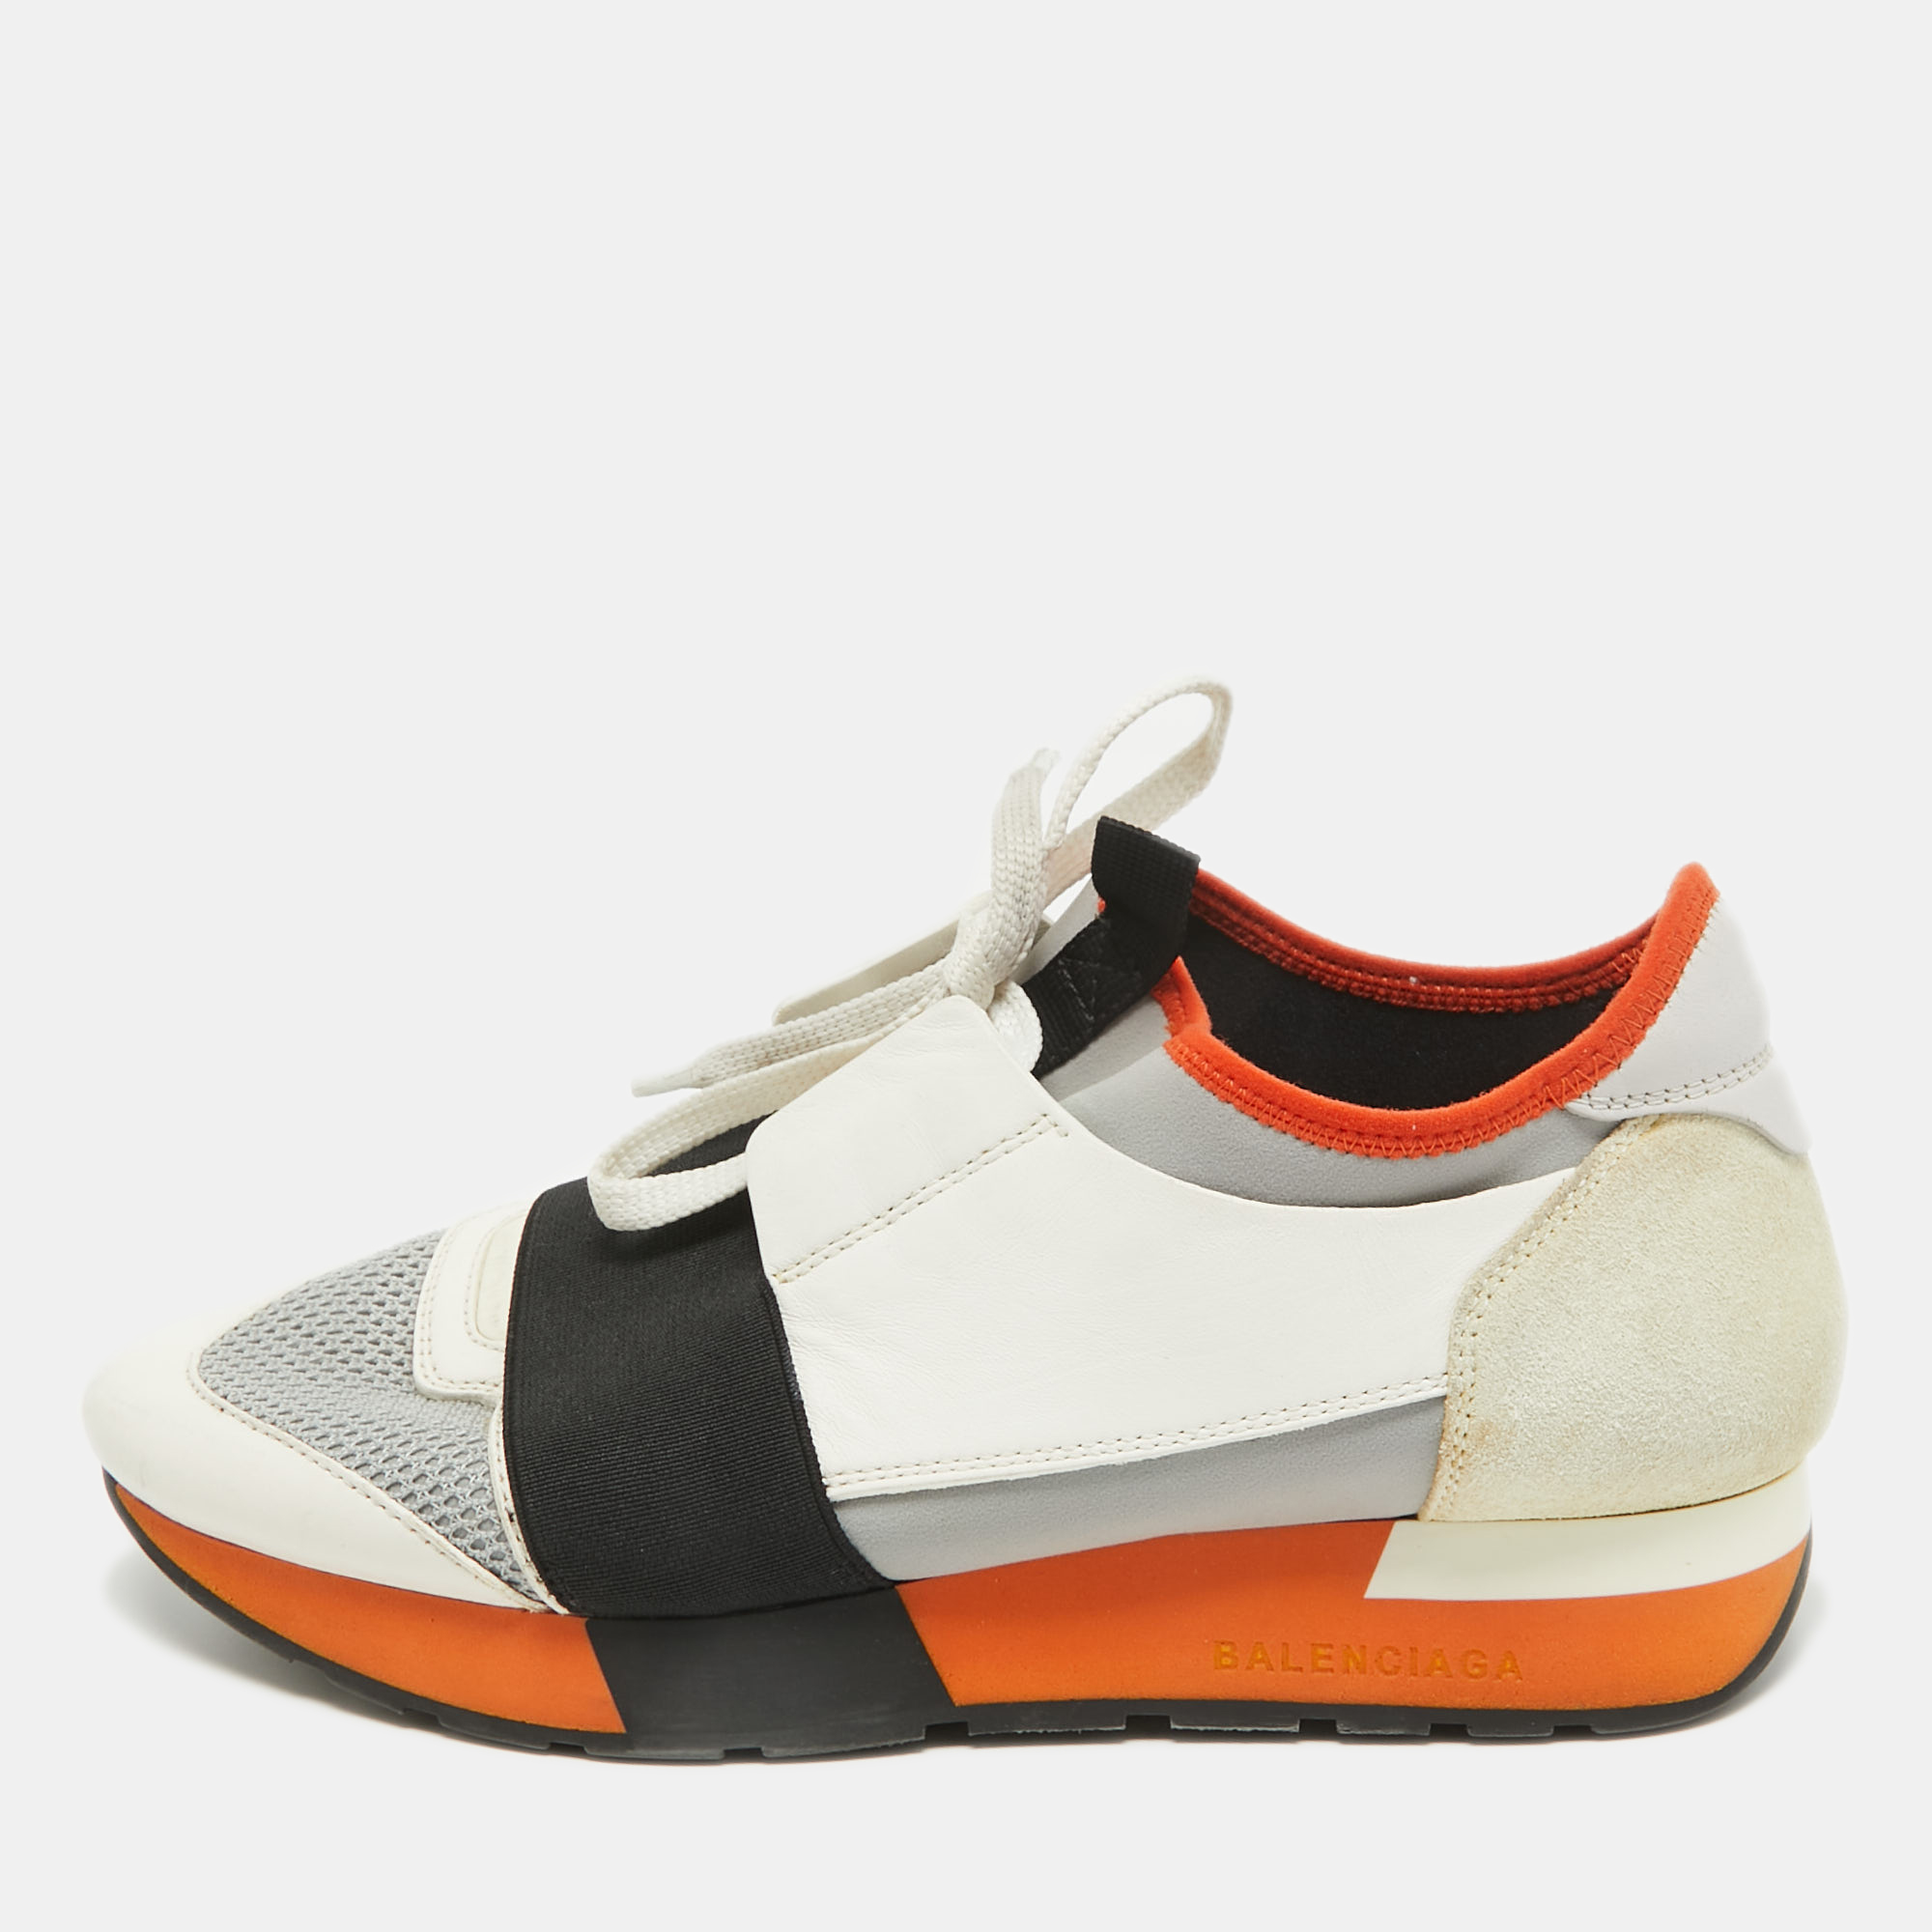 Elevate your footwear game with these Balenciaga sneakers. Combining high end aesthetics and unmatched comfort these sneakers are a symbol of modern luxury and impeccable taste.